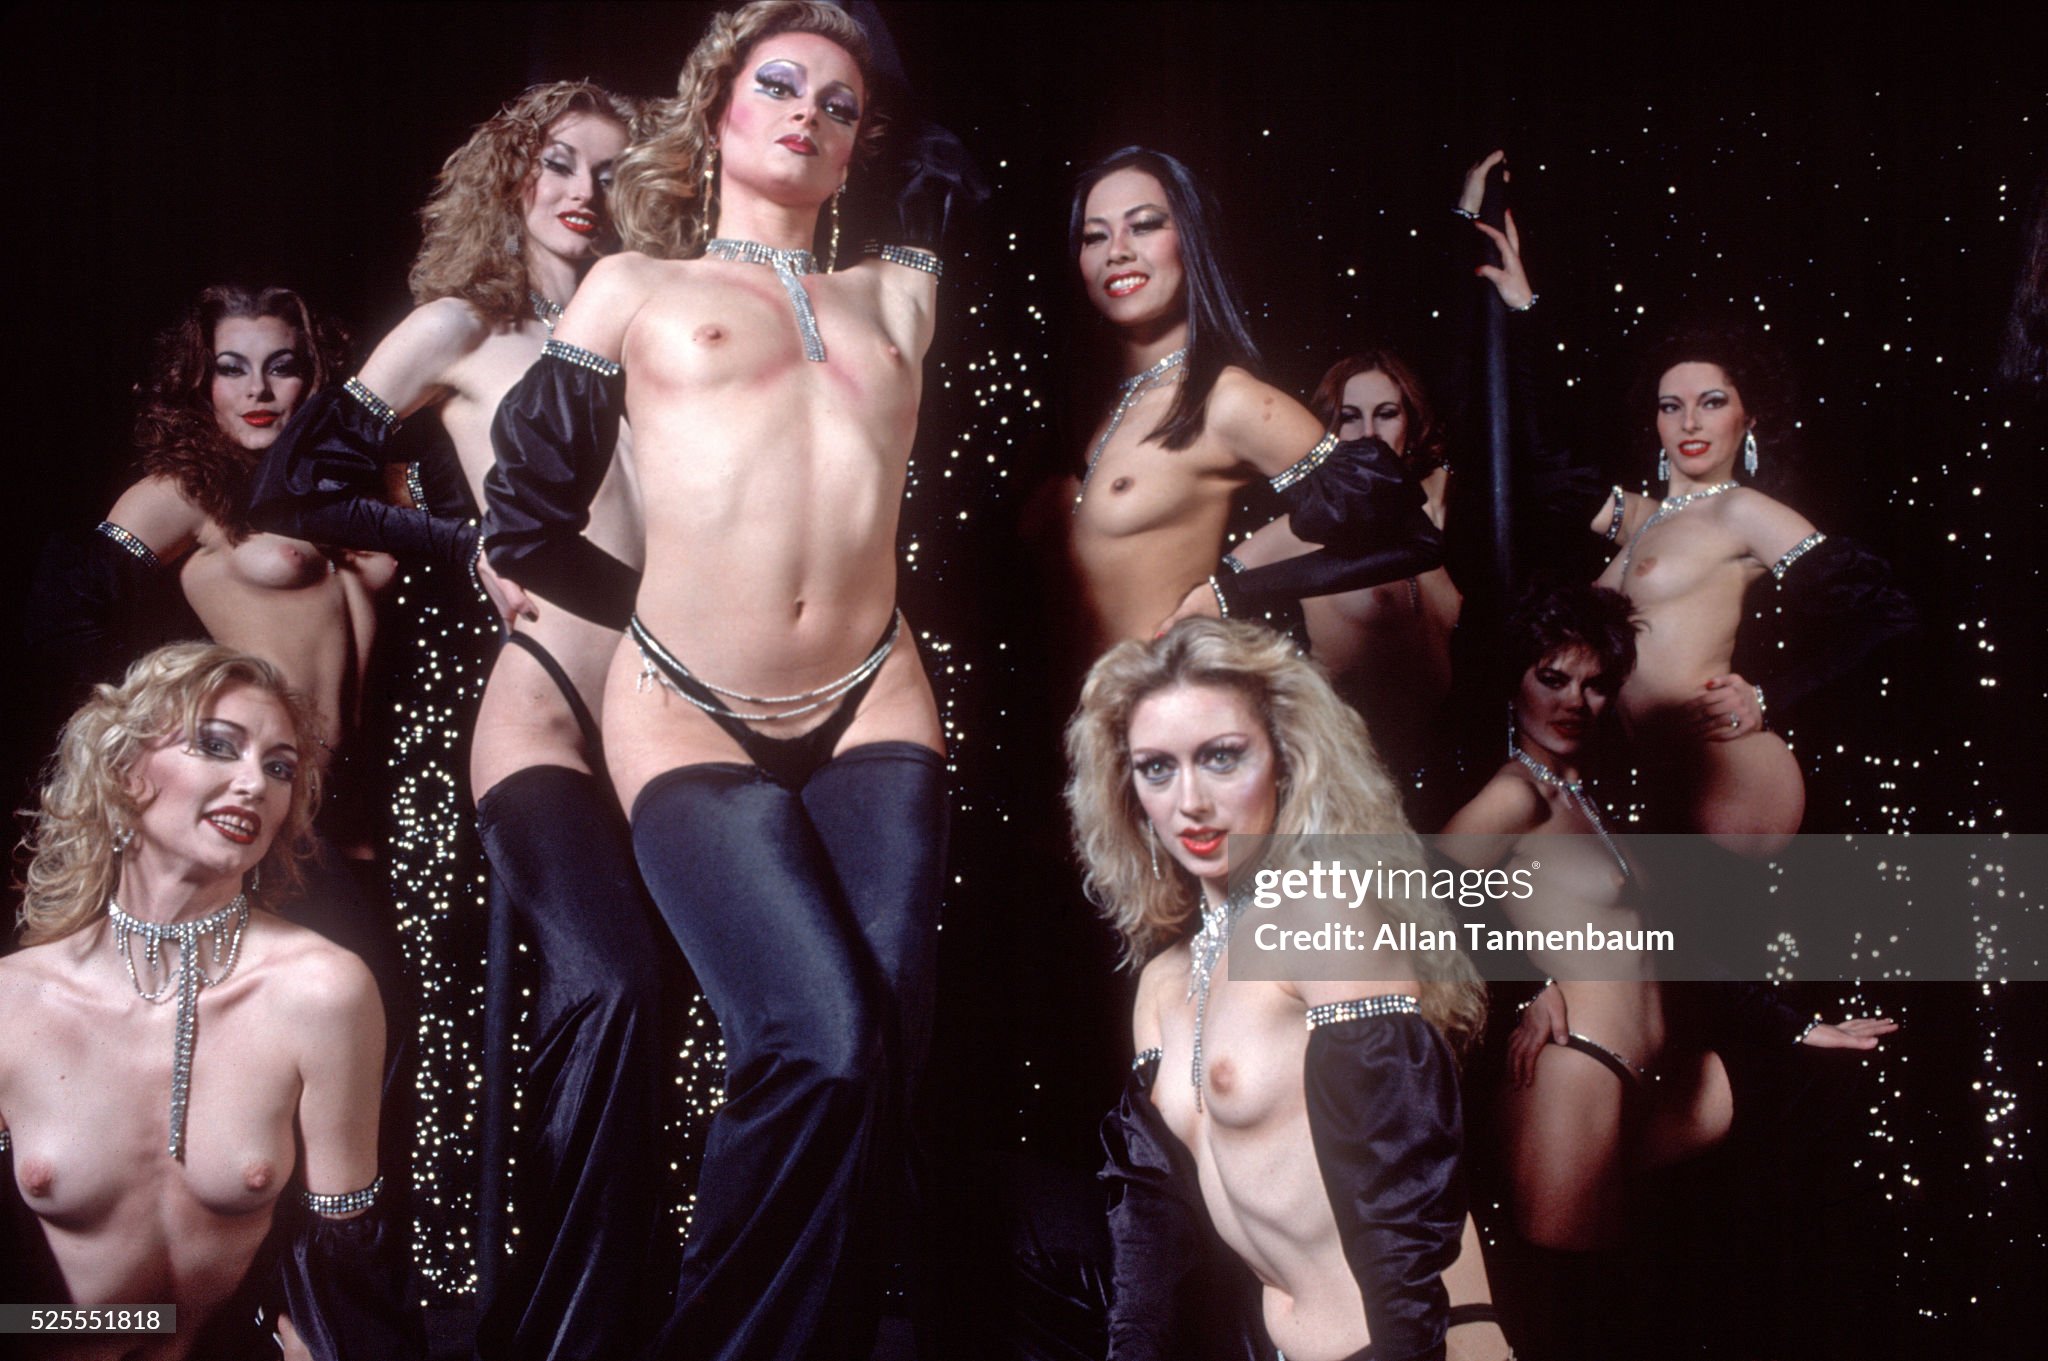 Girls' Chorus Line at the Wildcat Saloon, an attempt for a Parisian - or Las Vegas-style revue, in New York on 27 February 1982. 